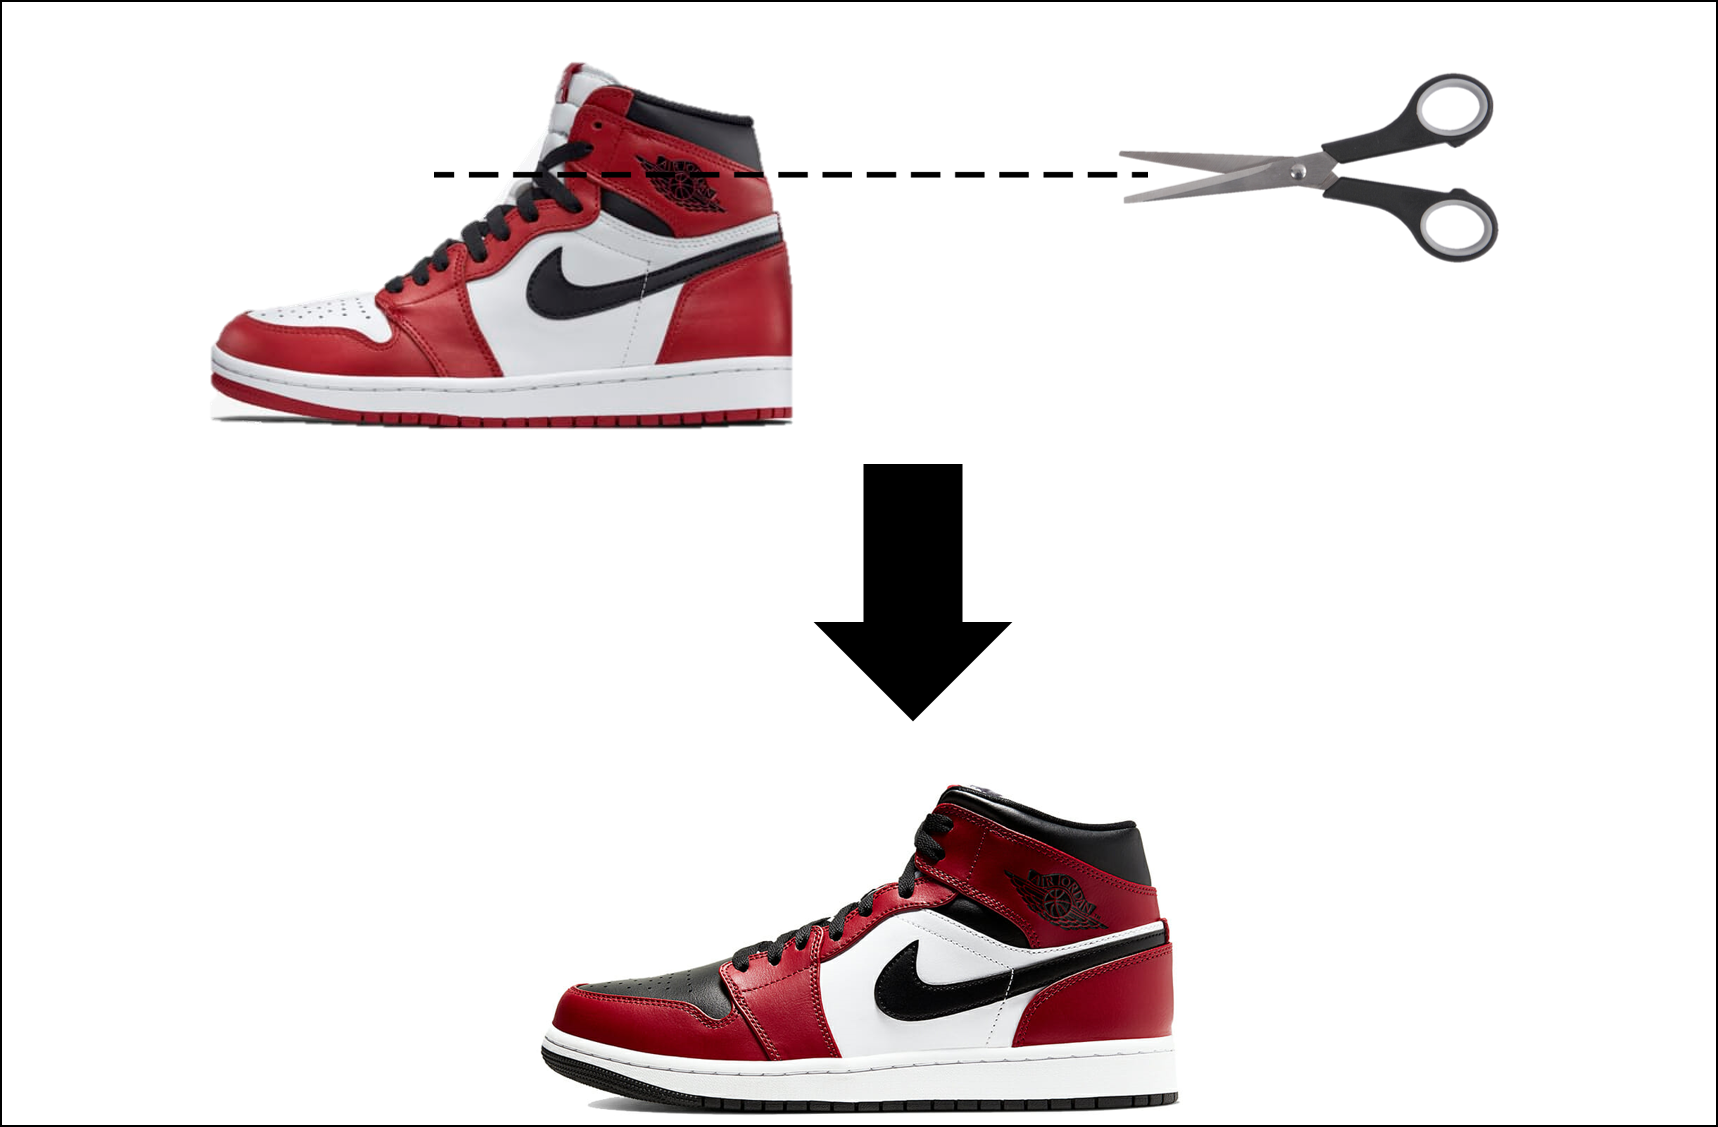 difference between mid and high jordan 1s